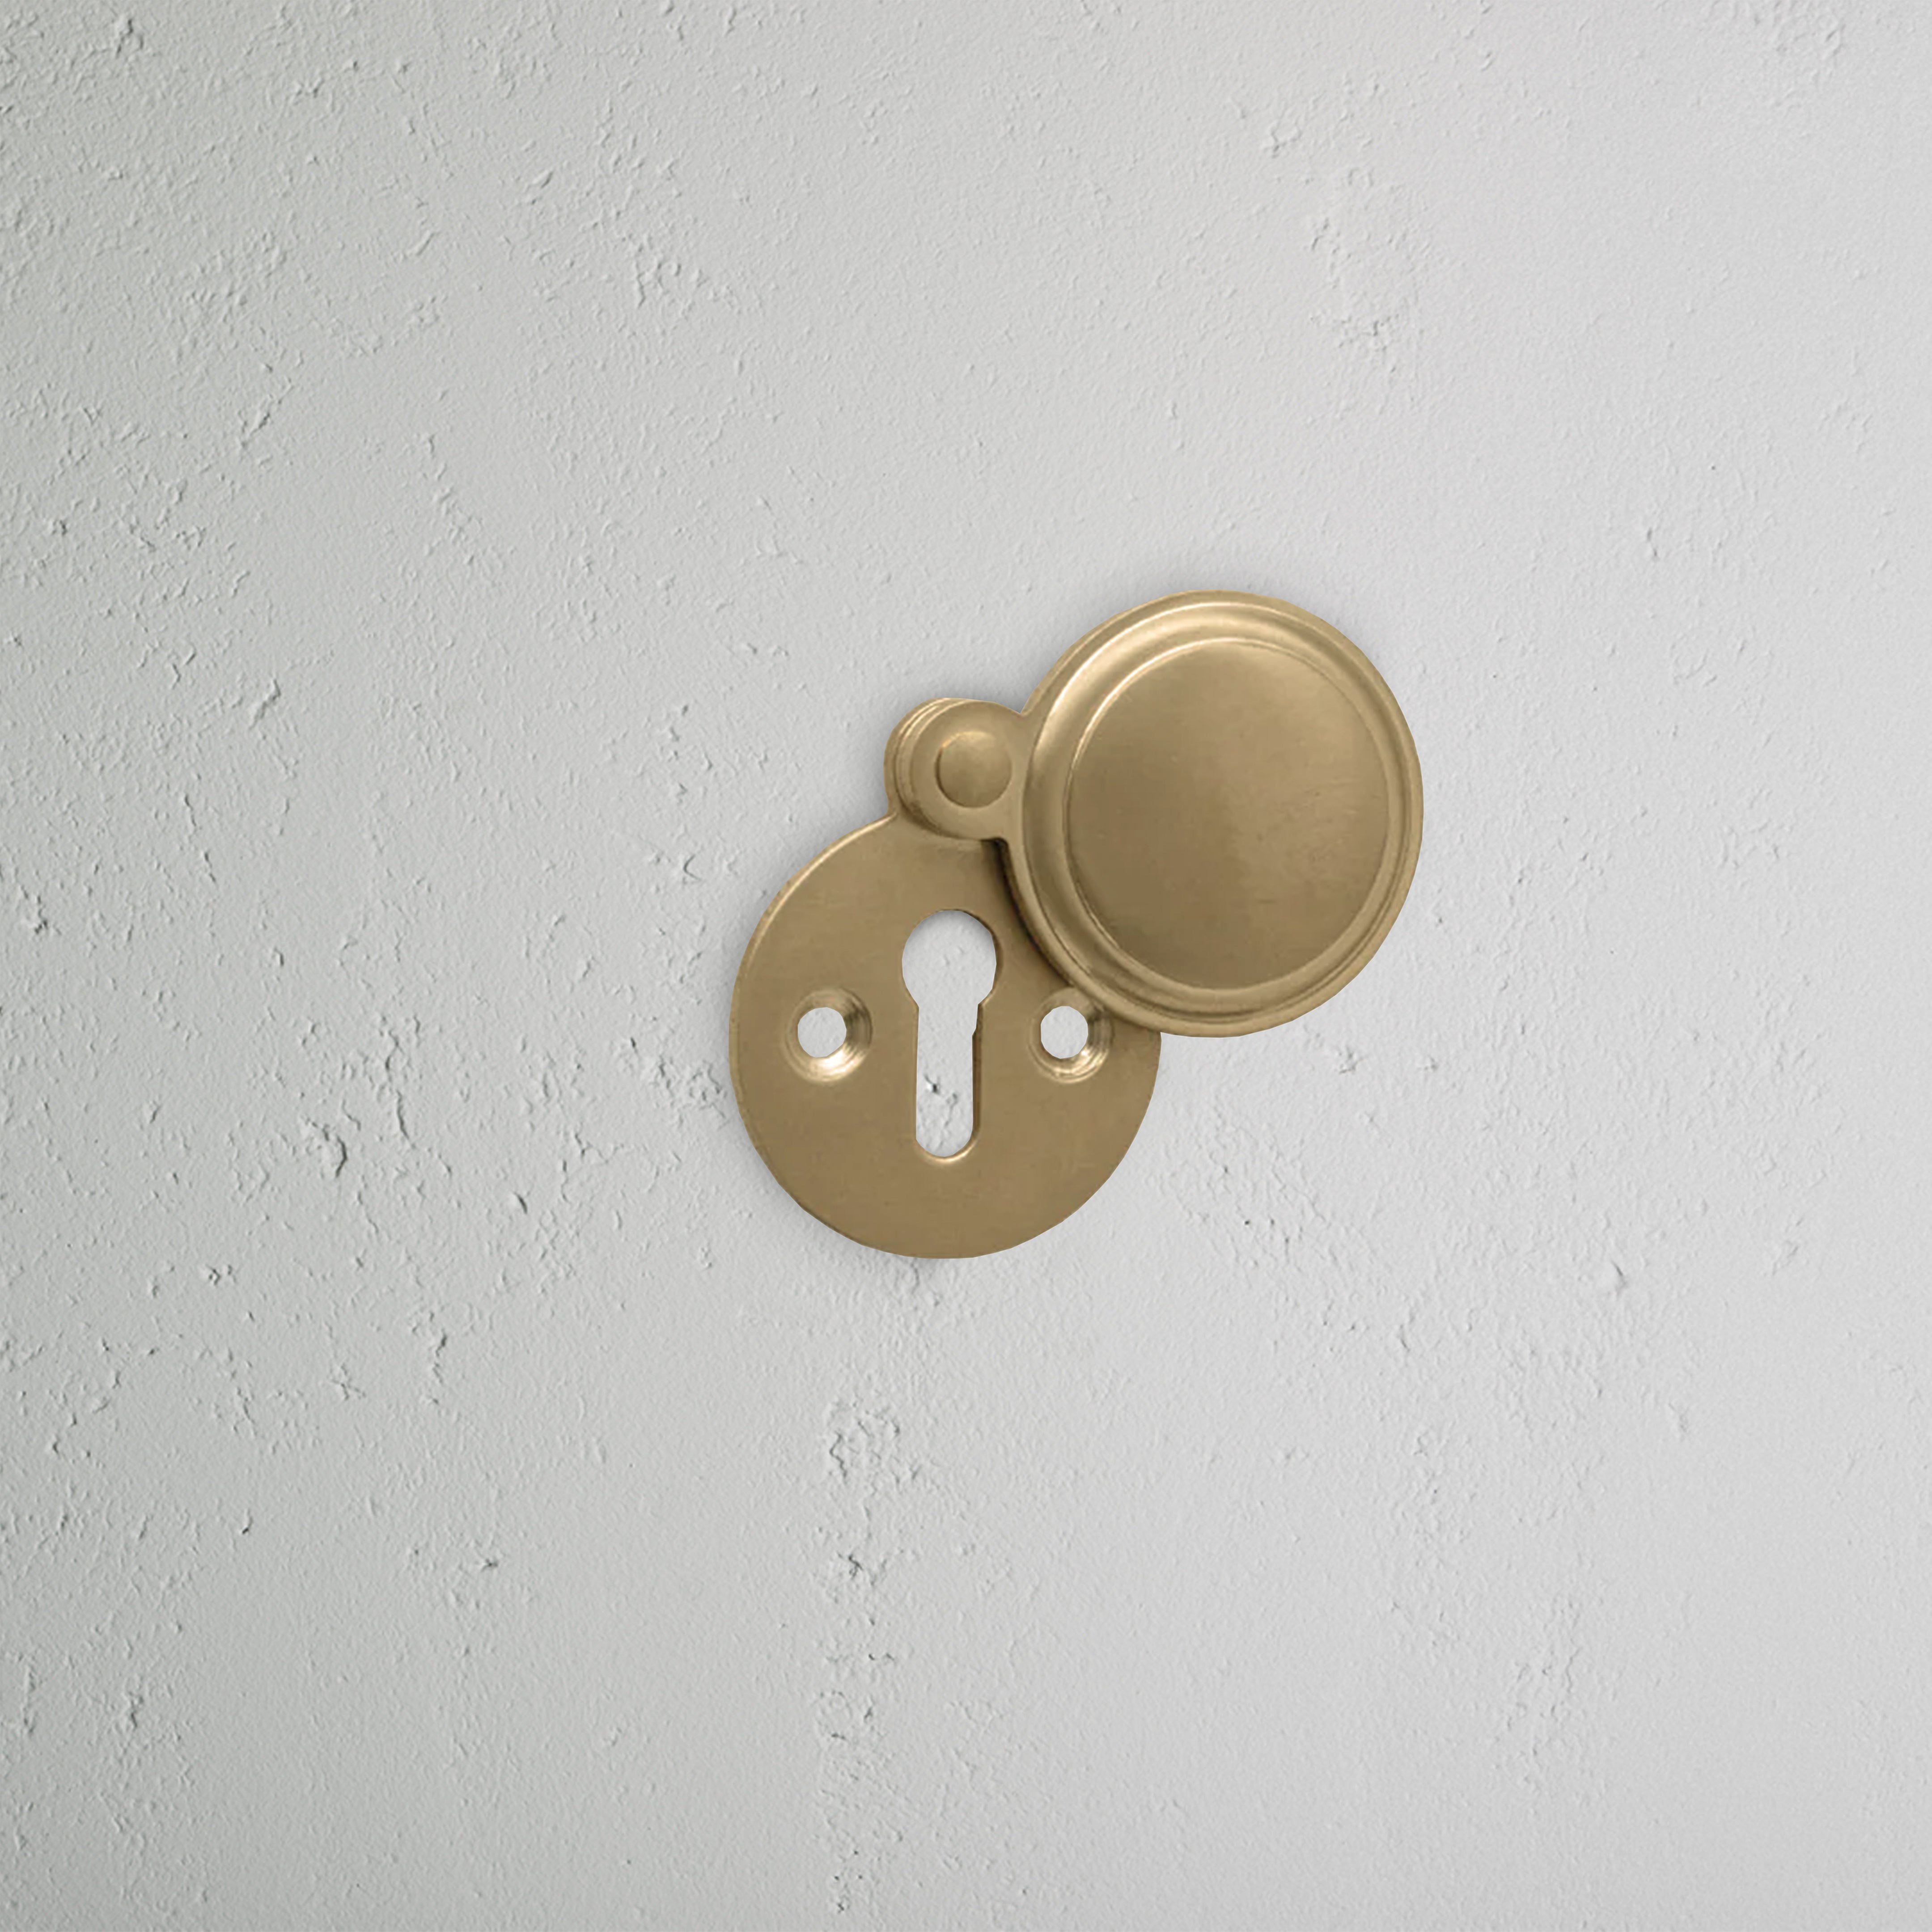 Canning Covered Key Escutcheon - Antique Brass